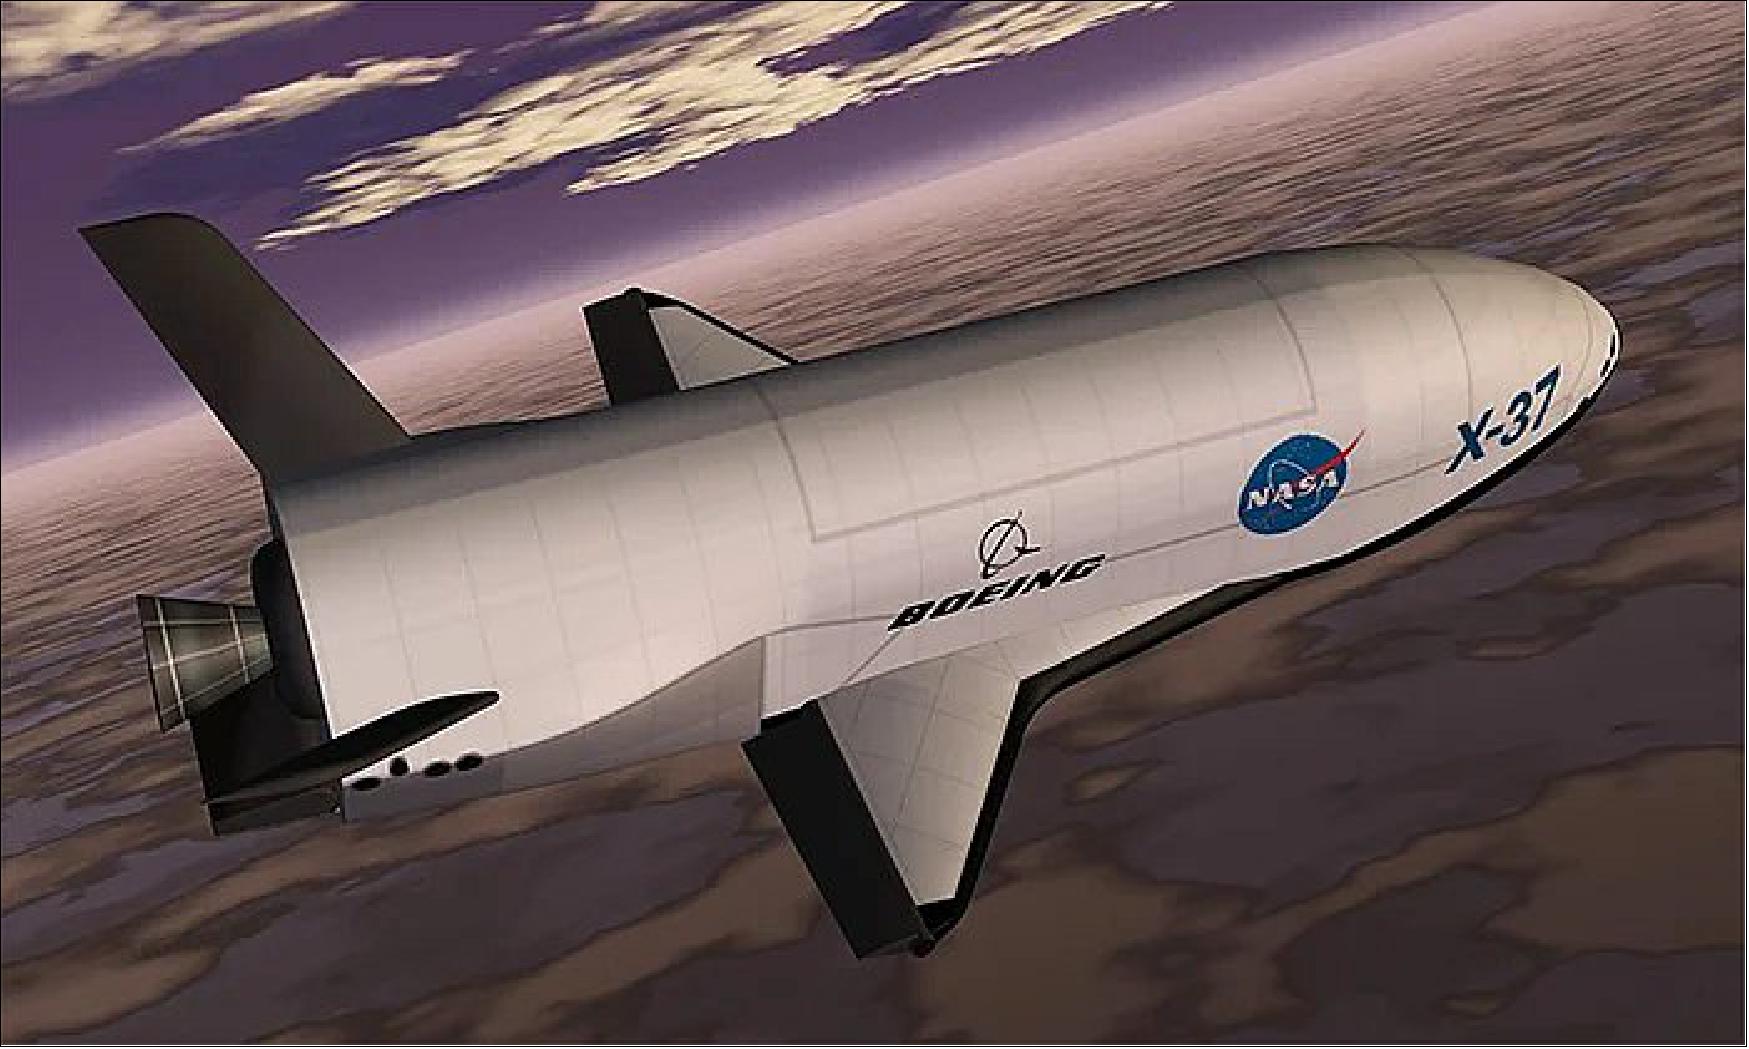 Figure 11: Artist's depiction of an X-37 space plane in flight (image credit: Boeing)